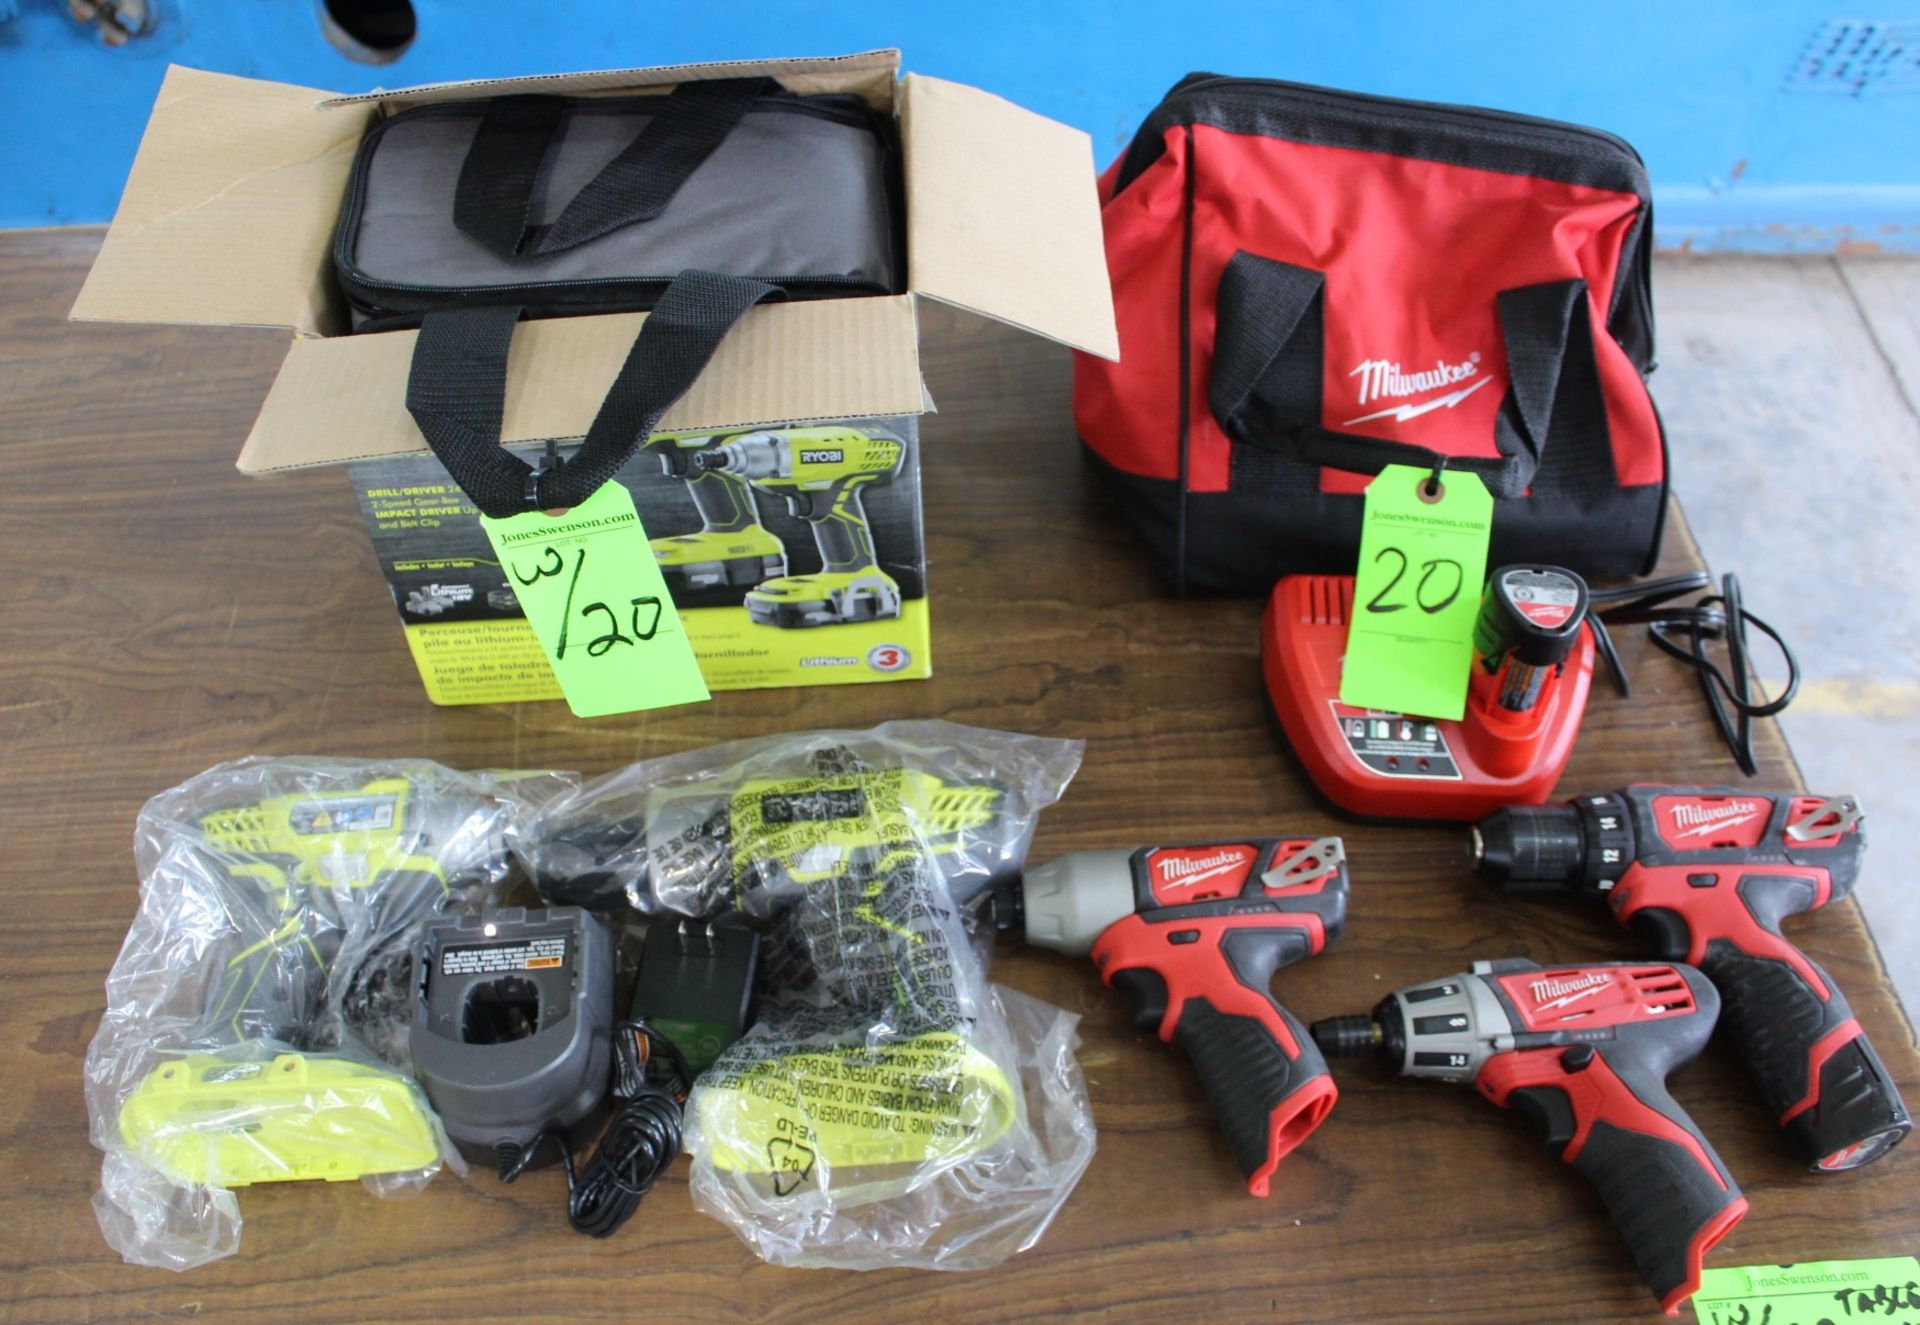 (5) Battery Operated Drills/Drivers, Like New, with Carry Bags: (3) Milwaukee 12V, (2) Ryobi 18V